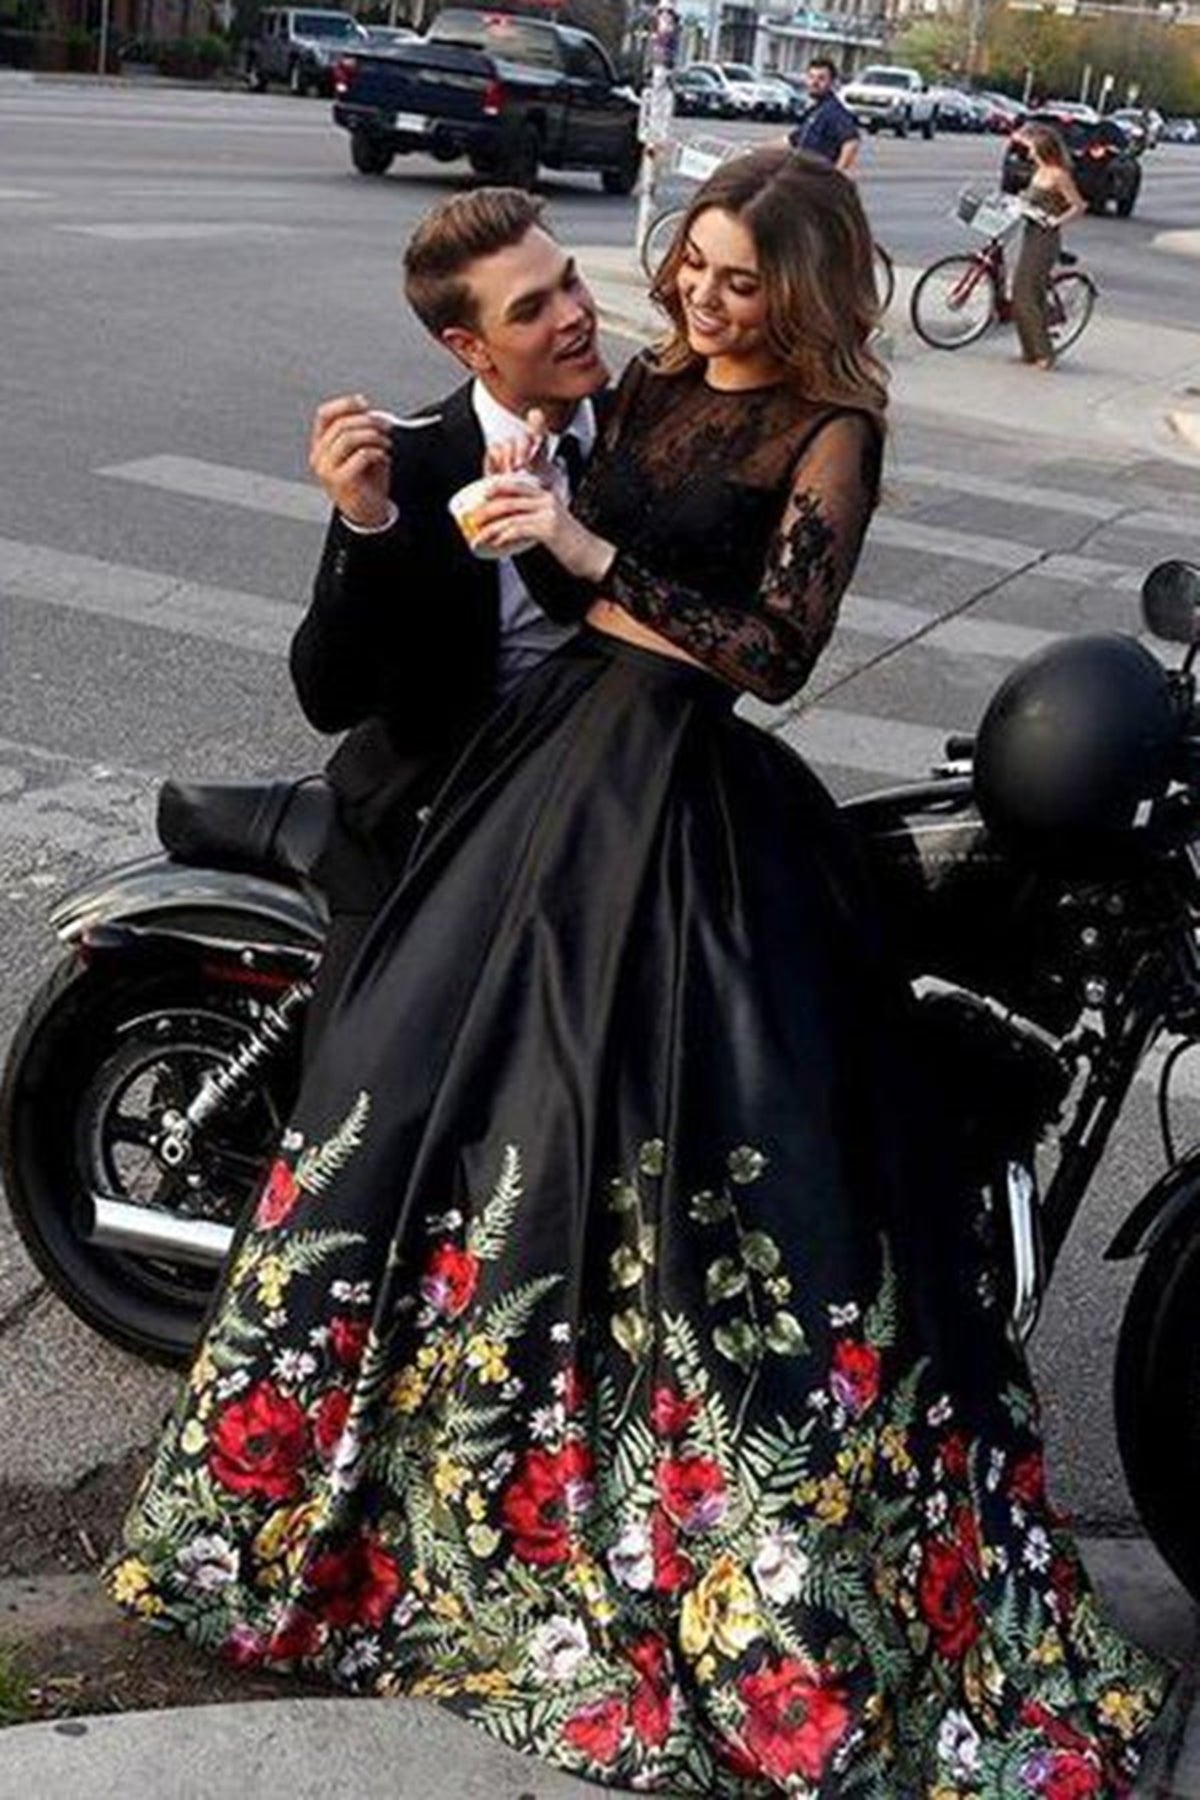 Long-Sleeve Two-Piece A-line Lace Modern Black Prom Dress